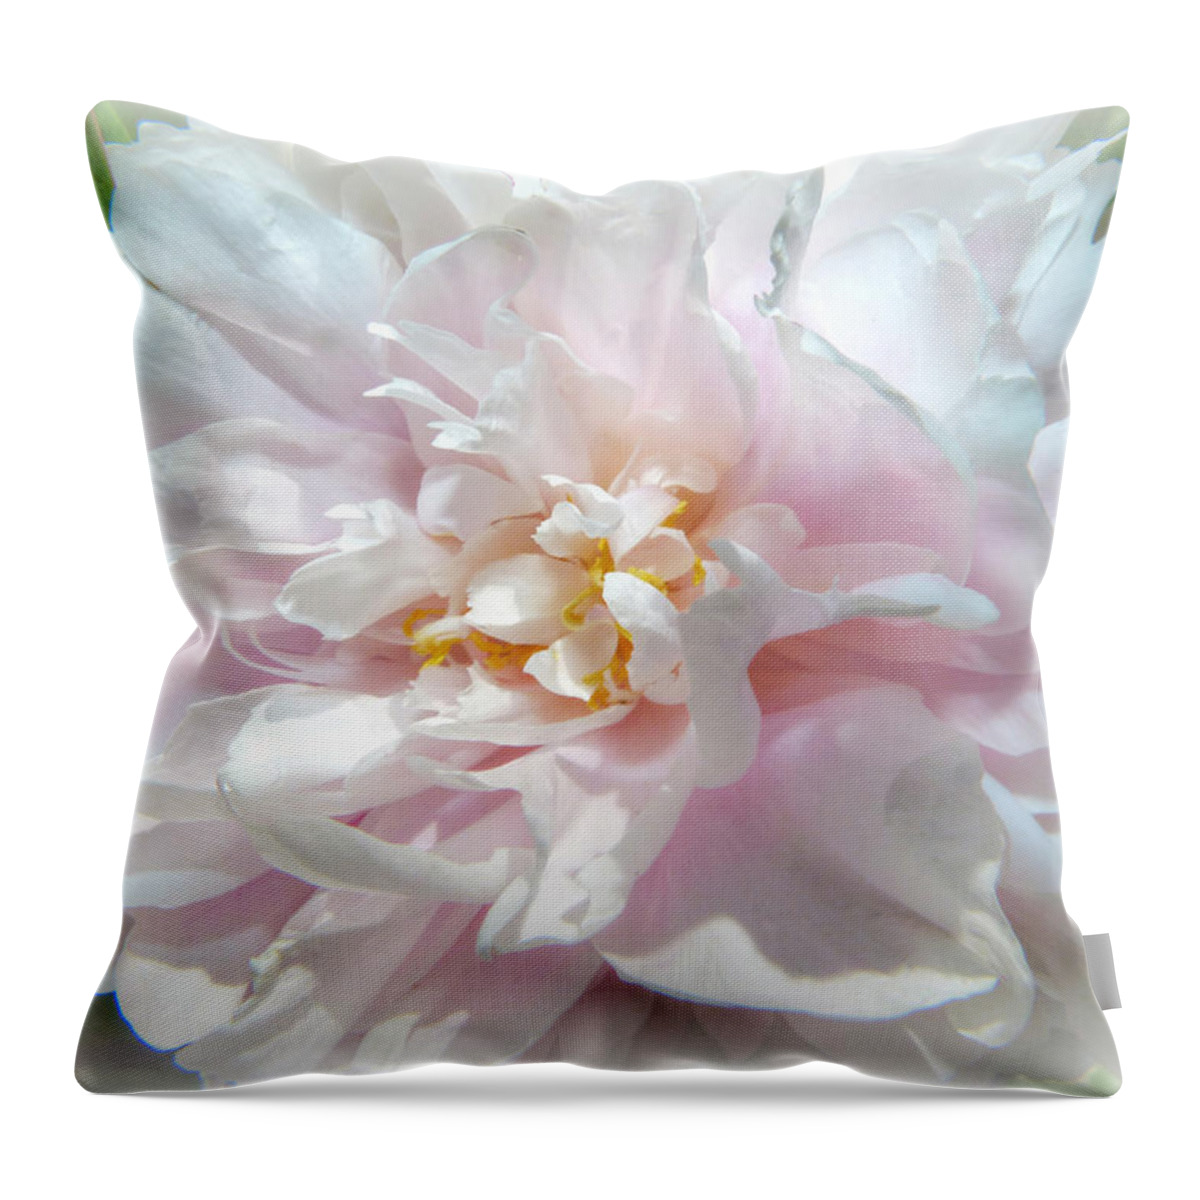 Peony Throw Pillow featuring the photograph Peony by Geraldine Alexander